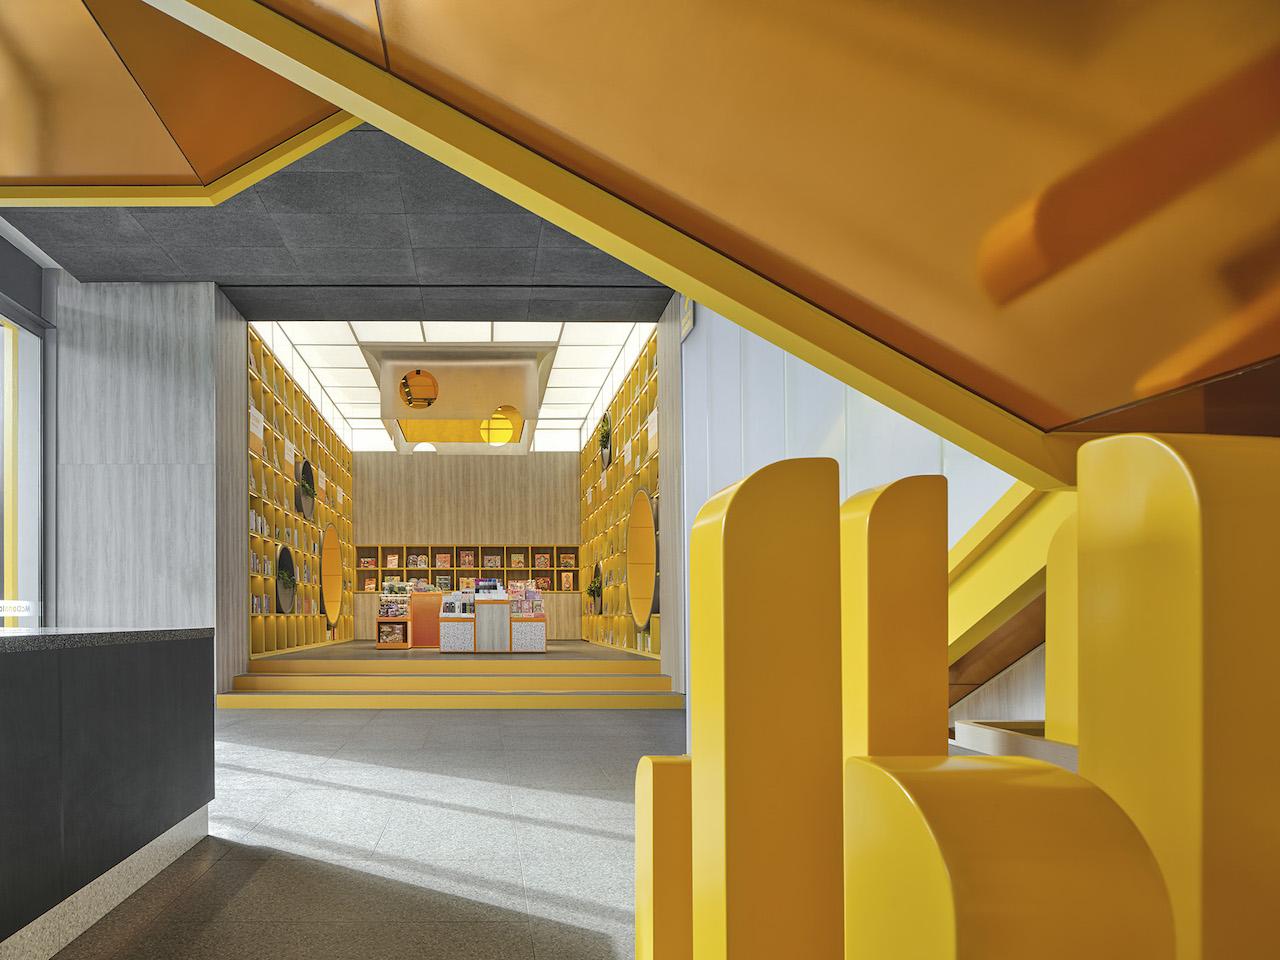 McDonald’s Unveils New Shanghai Headquarter in Collaboration with Steve Leung